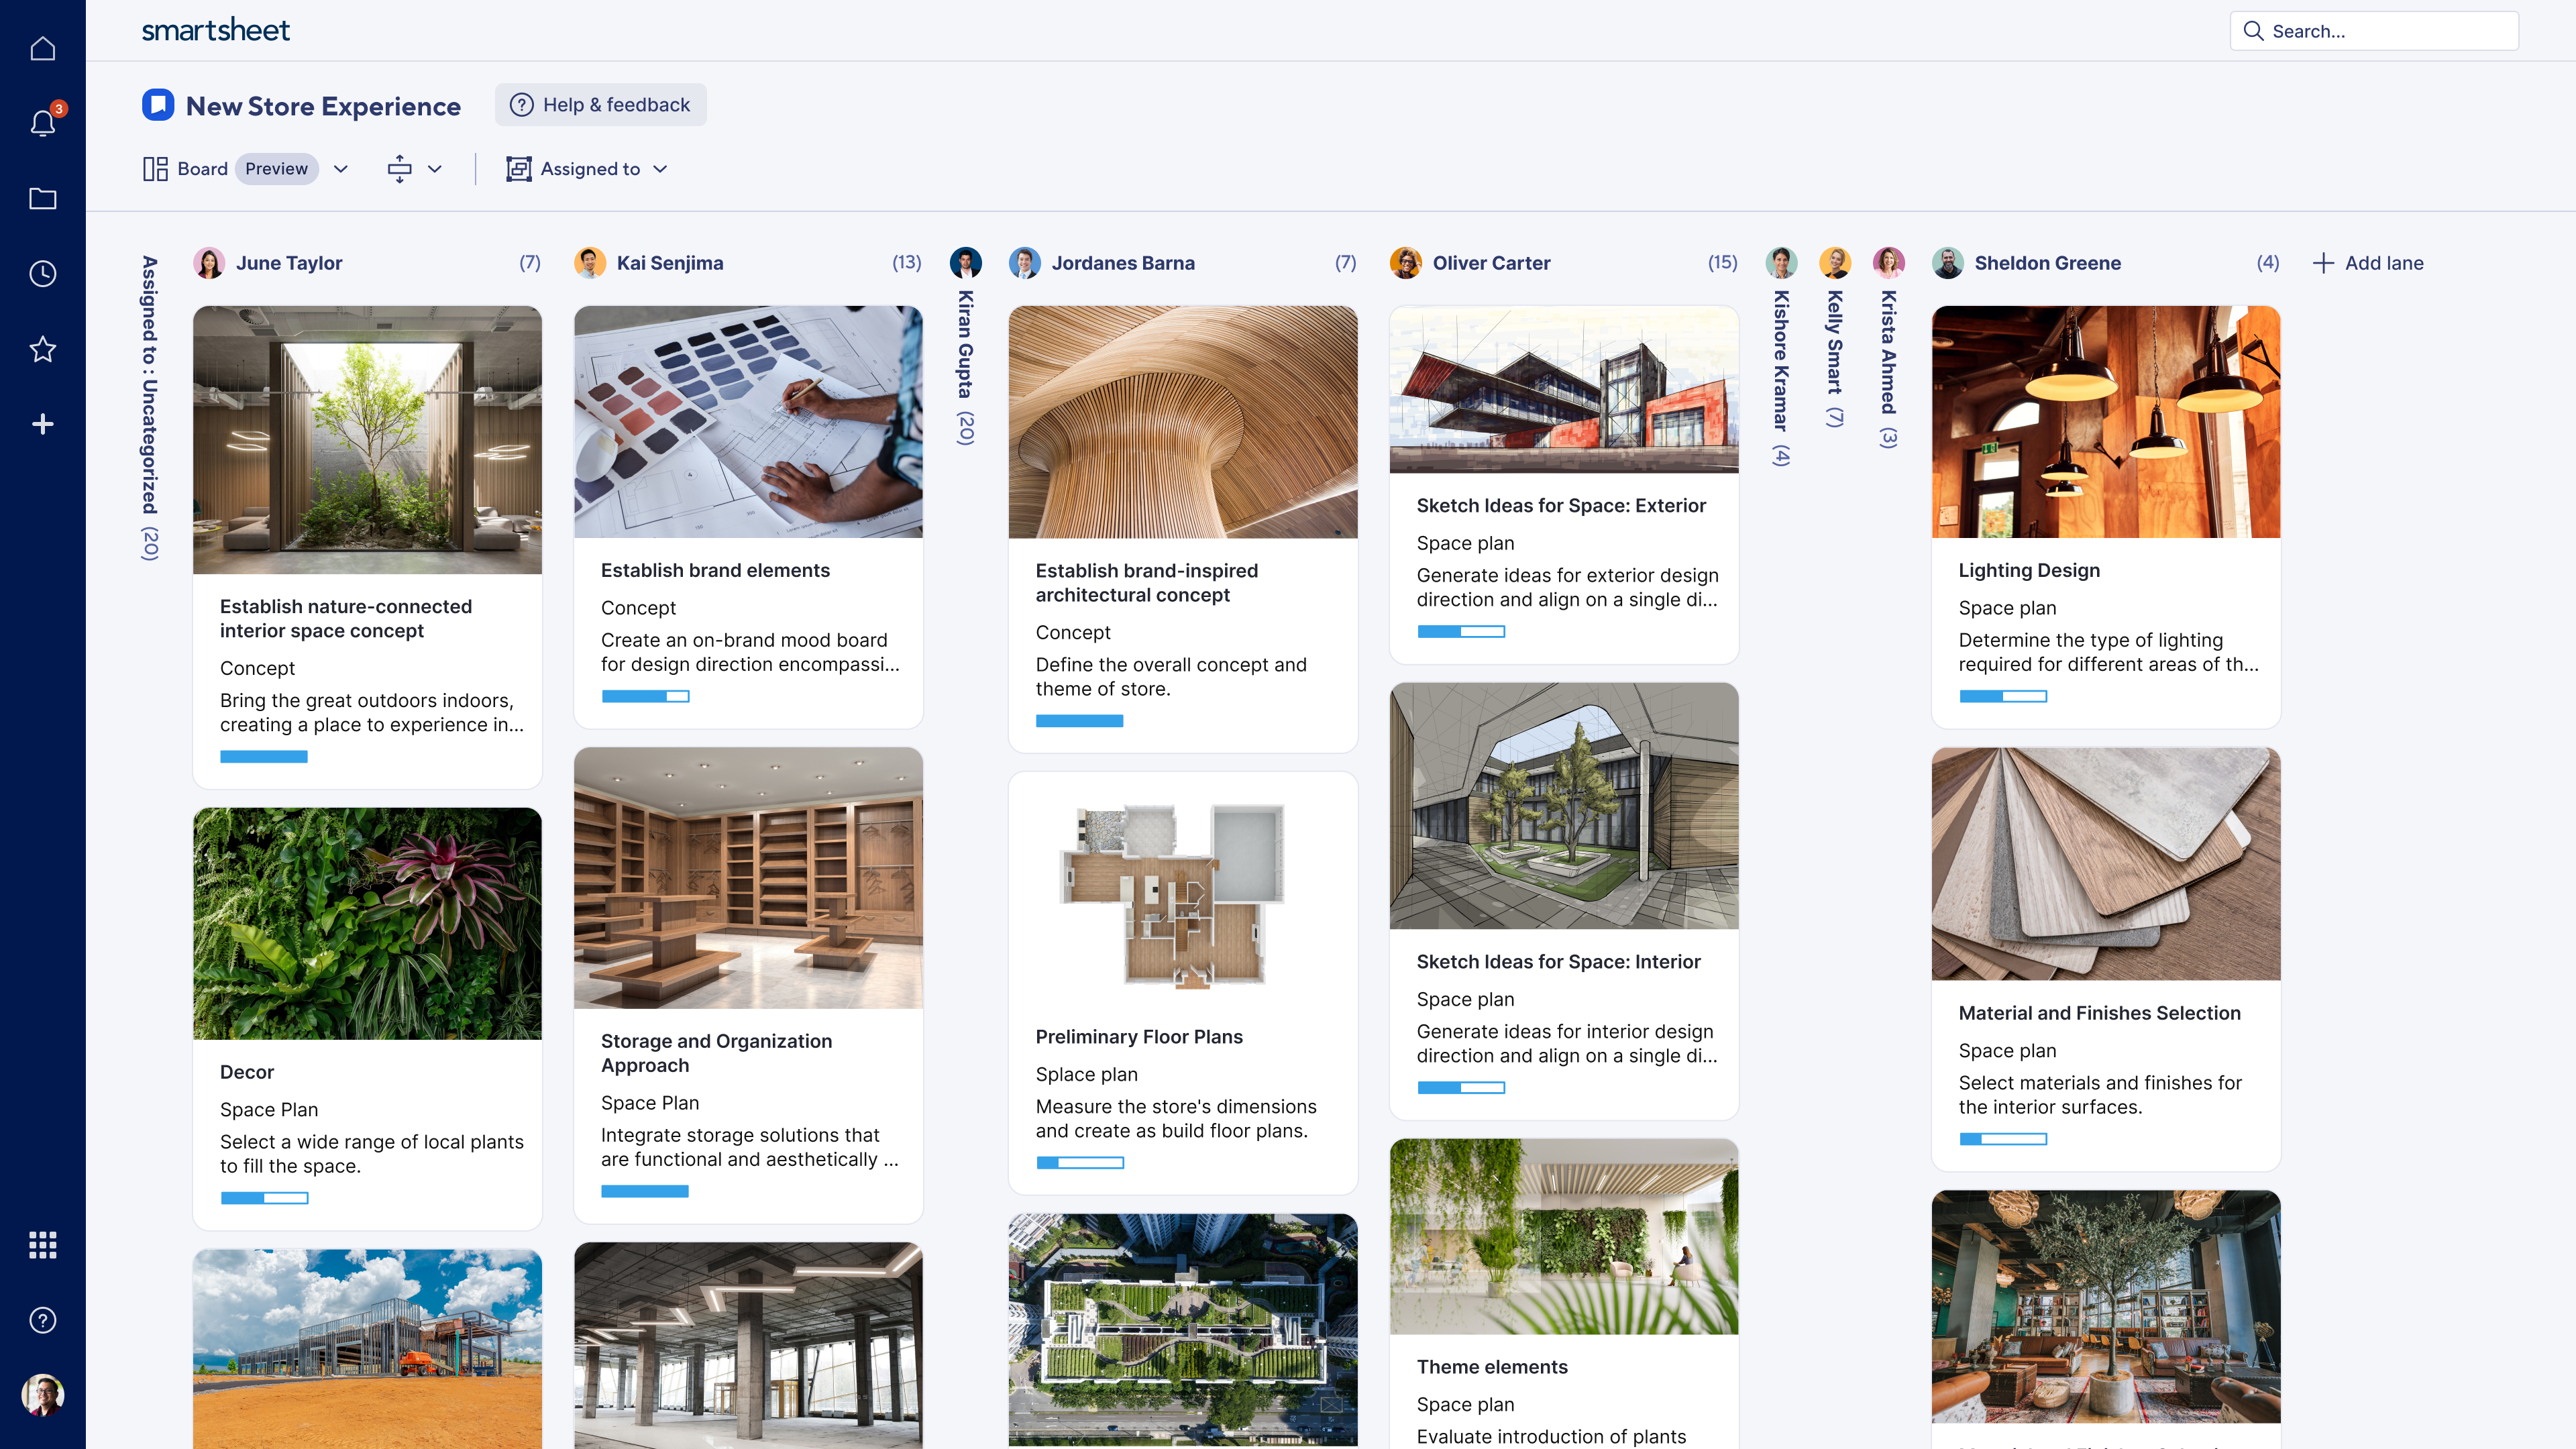 The new Smartsheet board view, exemplified by an organization's new store experience project. This board layout presents tasks organized in vertical lanes that are accompanied by visually captivating images displayed prominently on each task card.